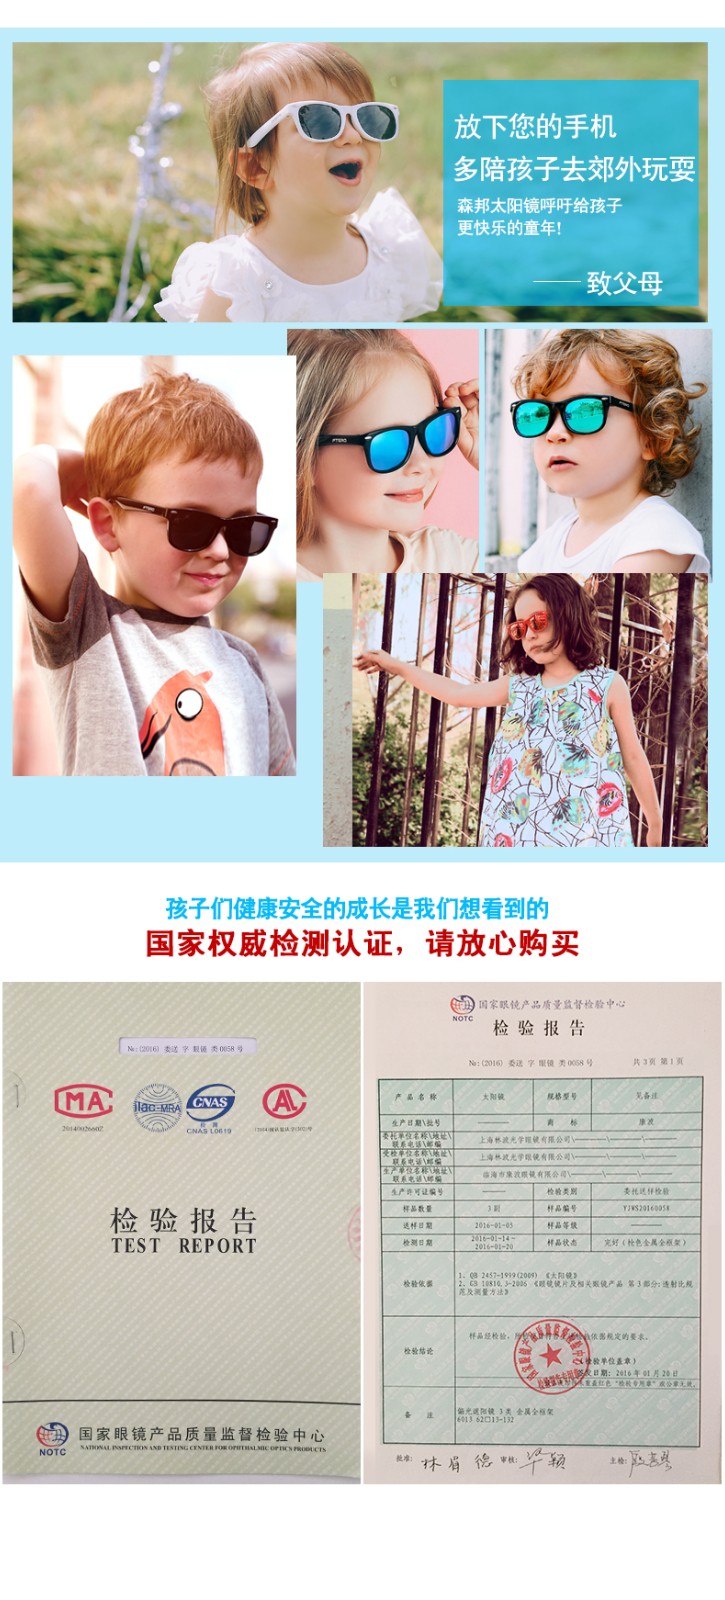 (RTS) SB-S8194 children sunglasses Factory direct sale high quality italy design colorful children sunglasses for kids